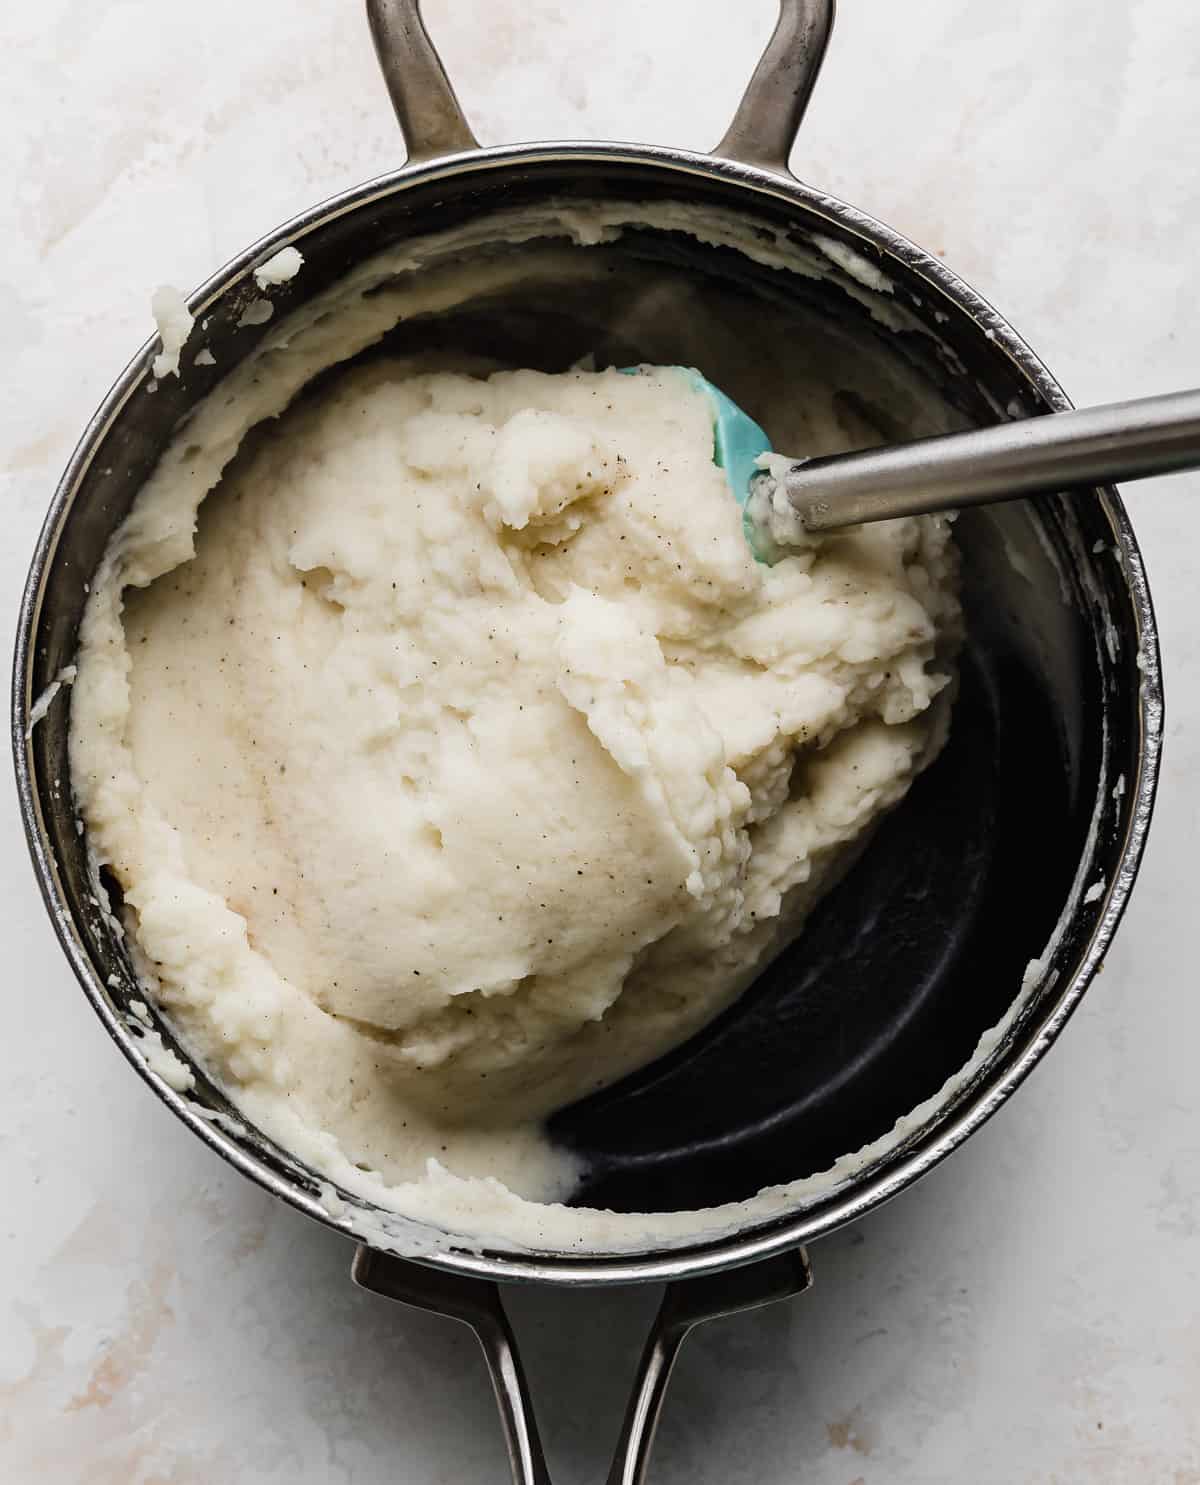 Mashed potatoes in a black pot on a white background.